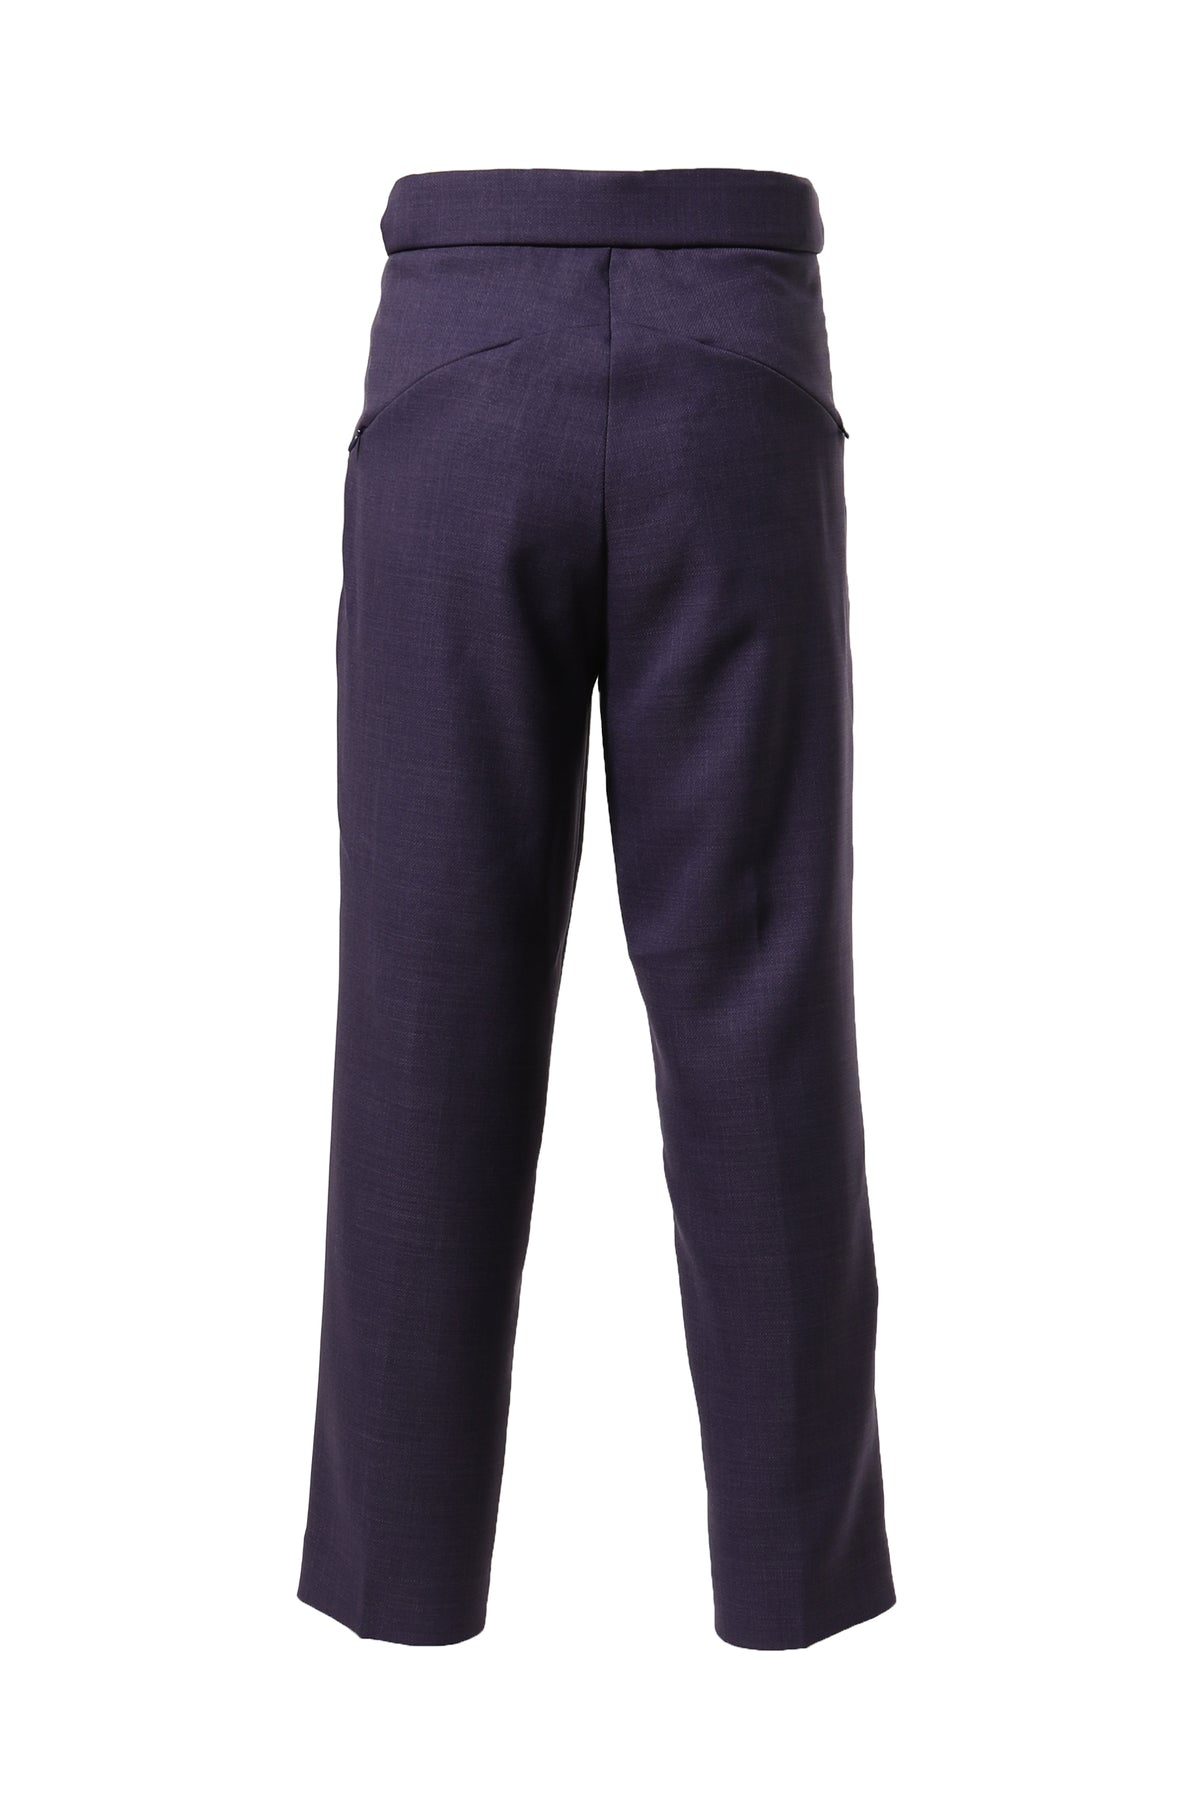 TUCKED SIDE TAB TROUSER - POLY DOBBY CLOTH / PUR